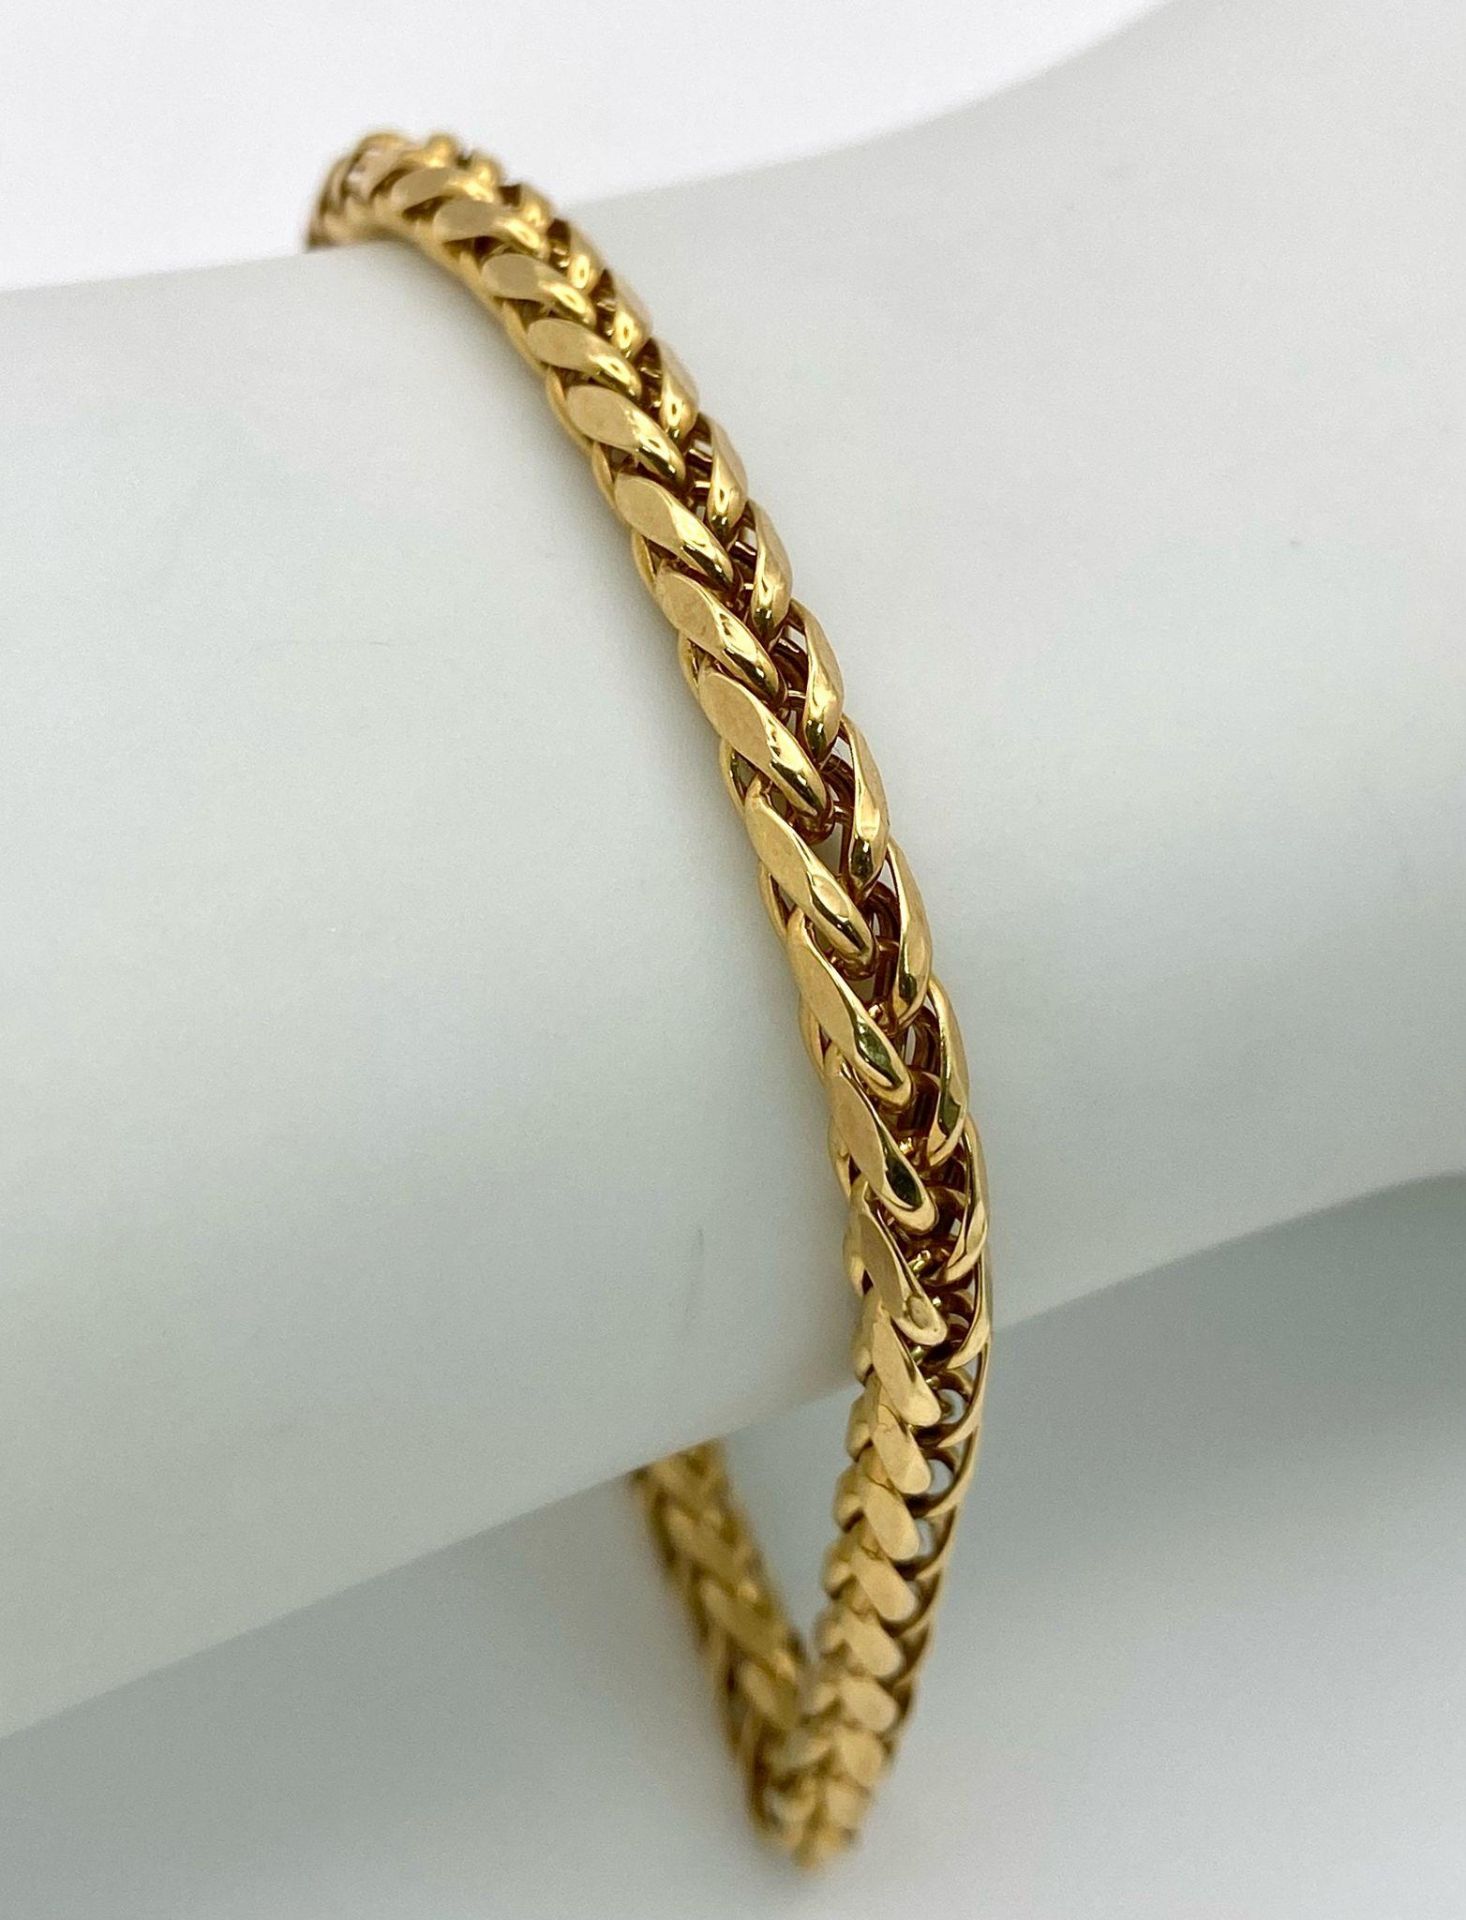 A 9K Yellow Gold Intricate Link Bracelet. 18cm. 5g weight. - Image 3 of 6